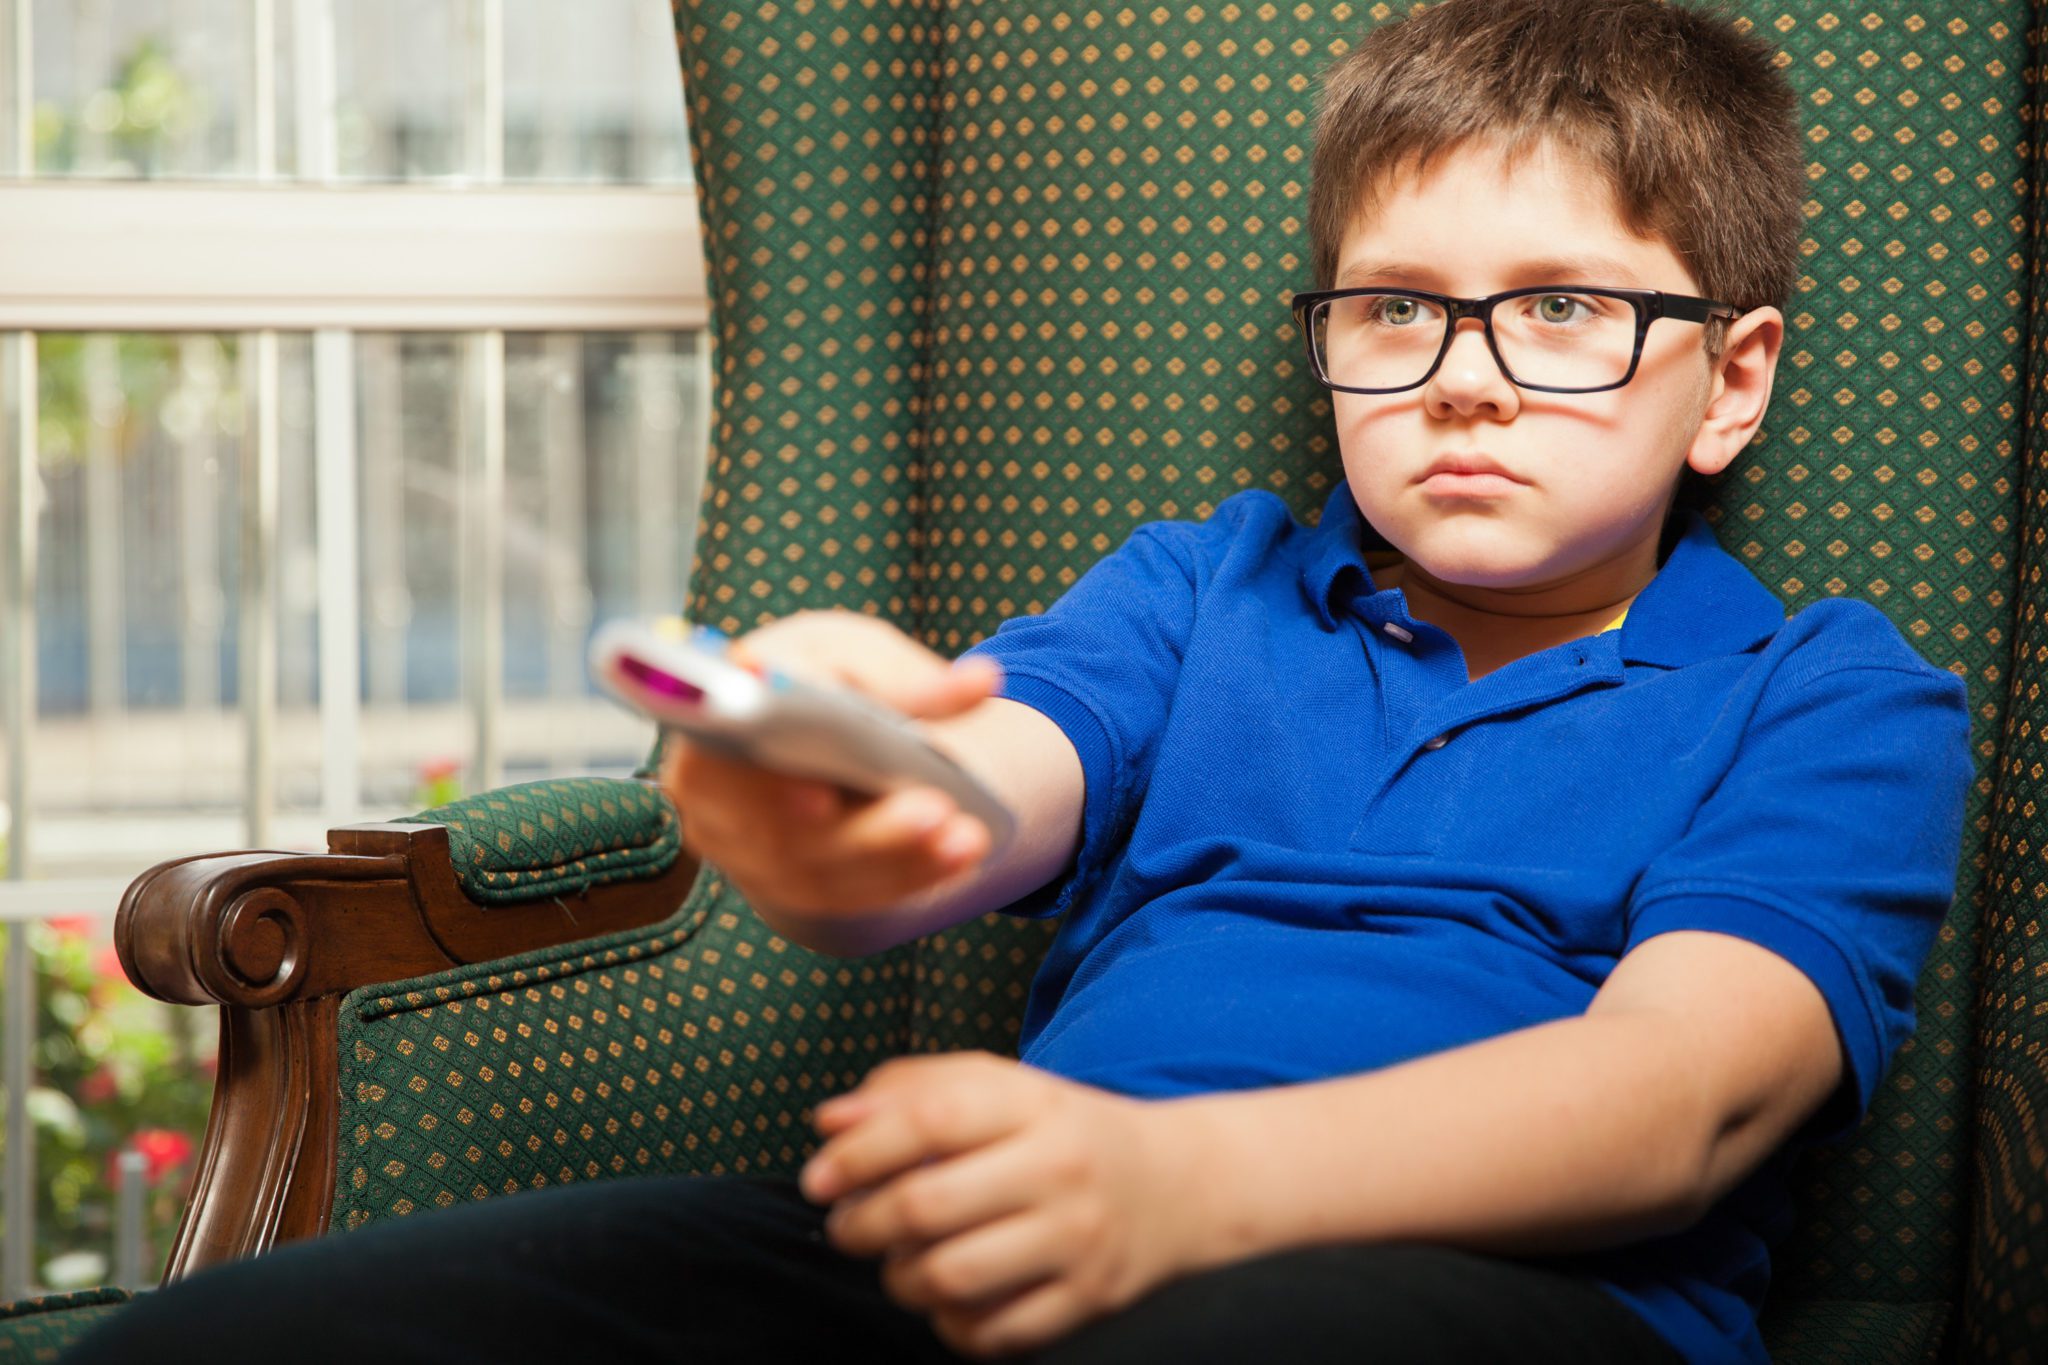 Young male child sitting leaning back on sofa flipping through channels